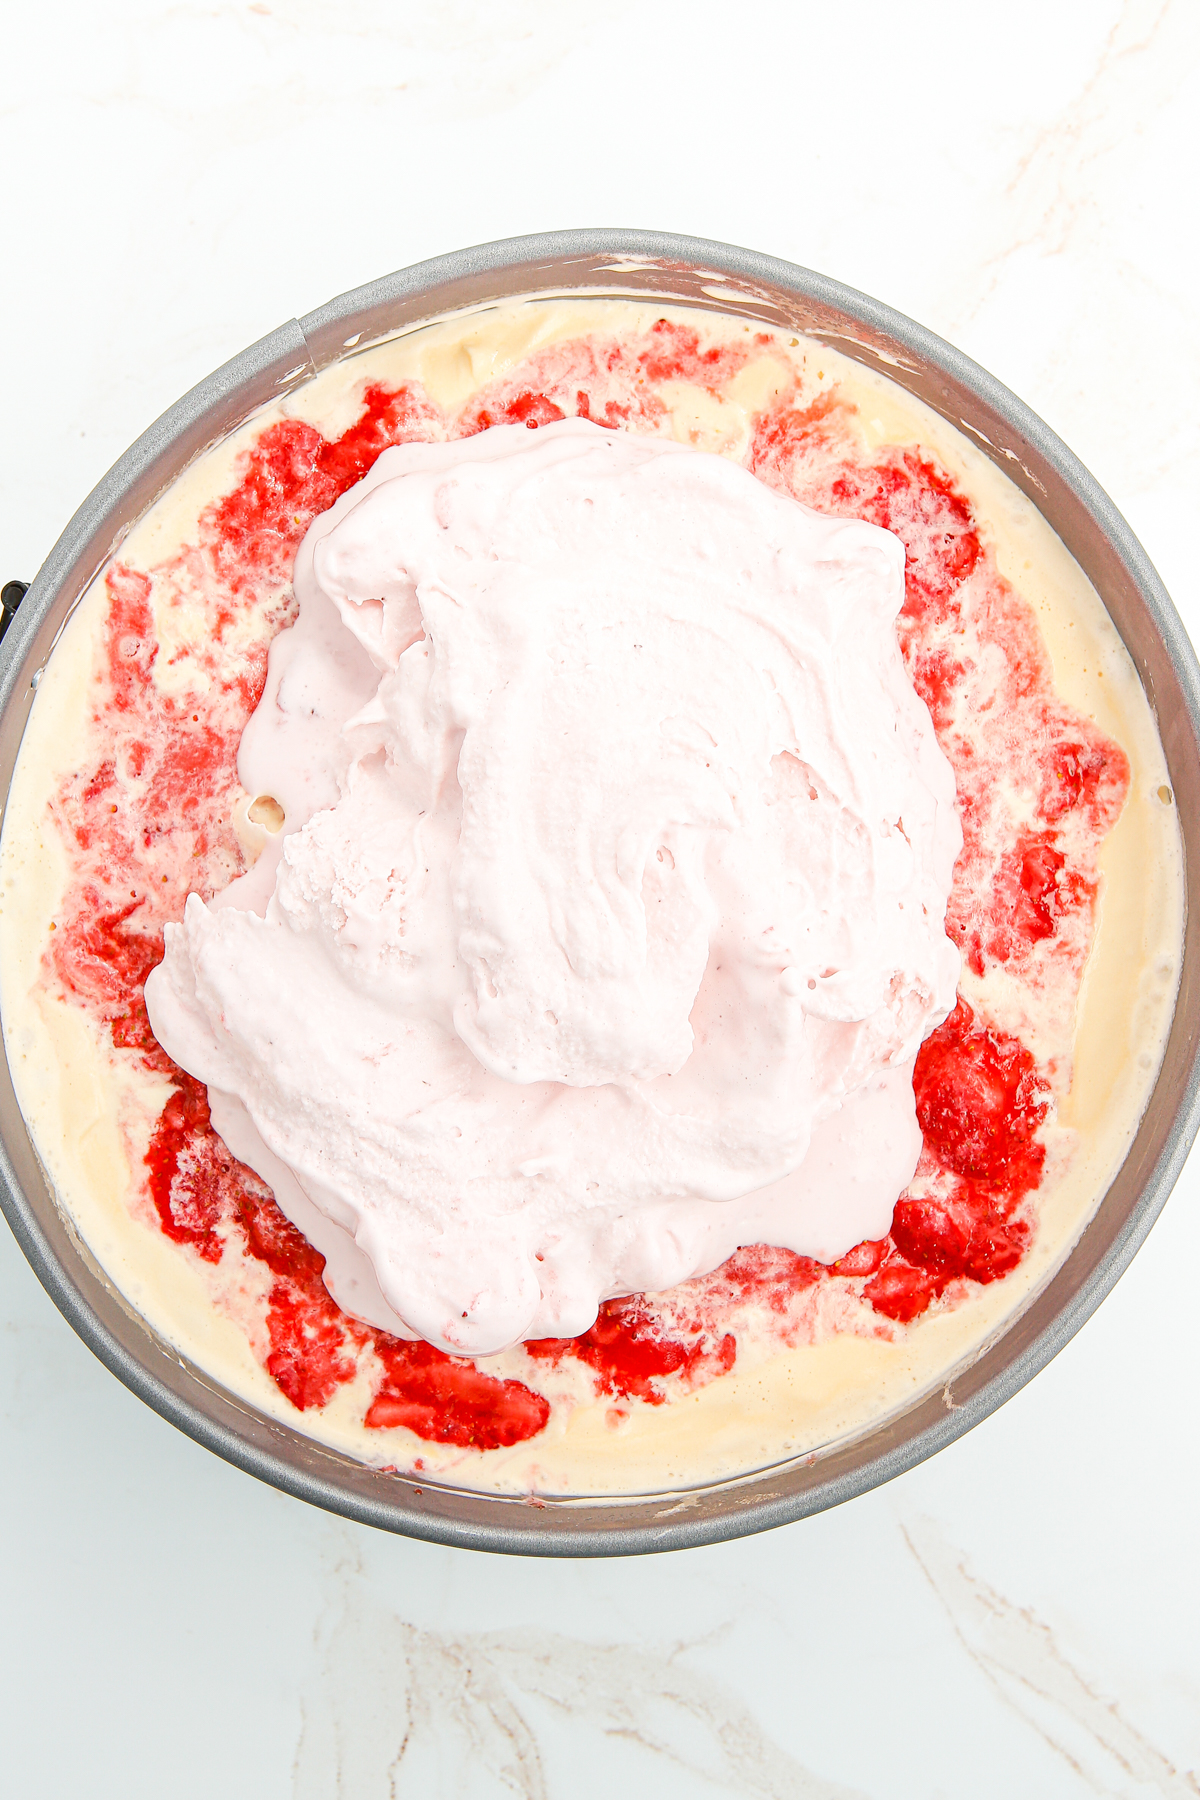 strawberry ice cream on top of mashed strawberries